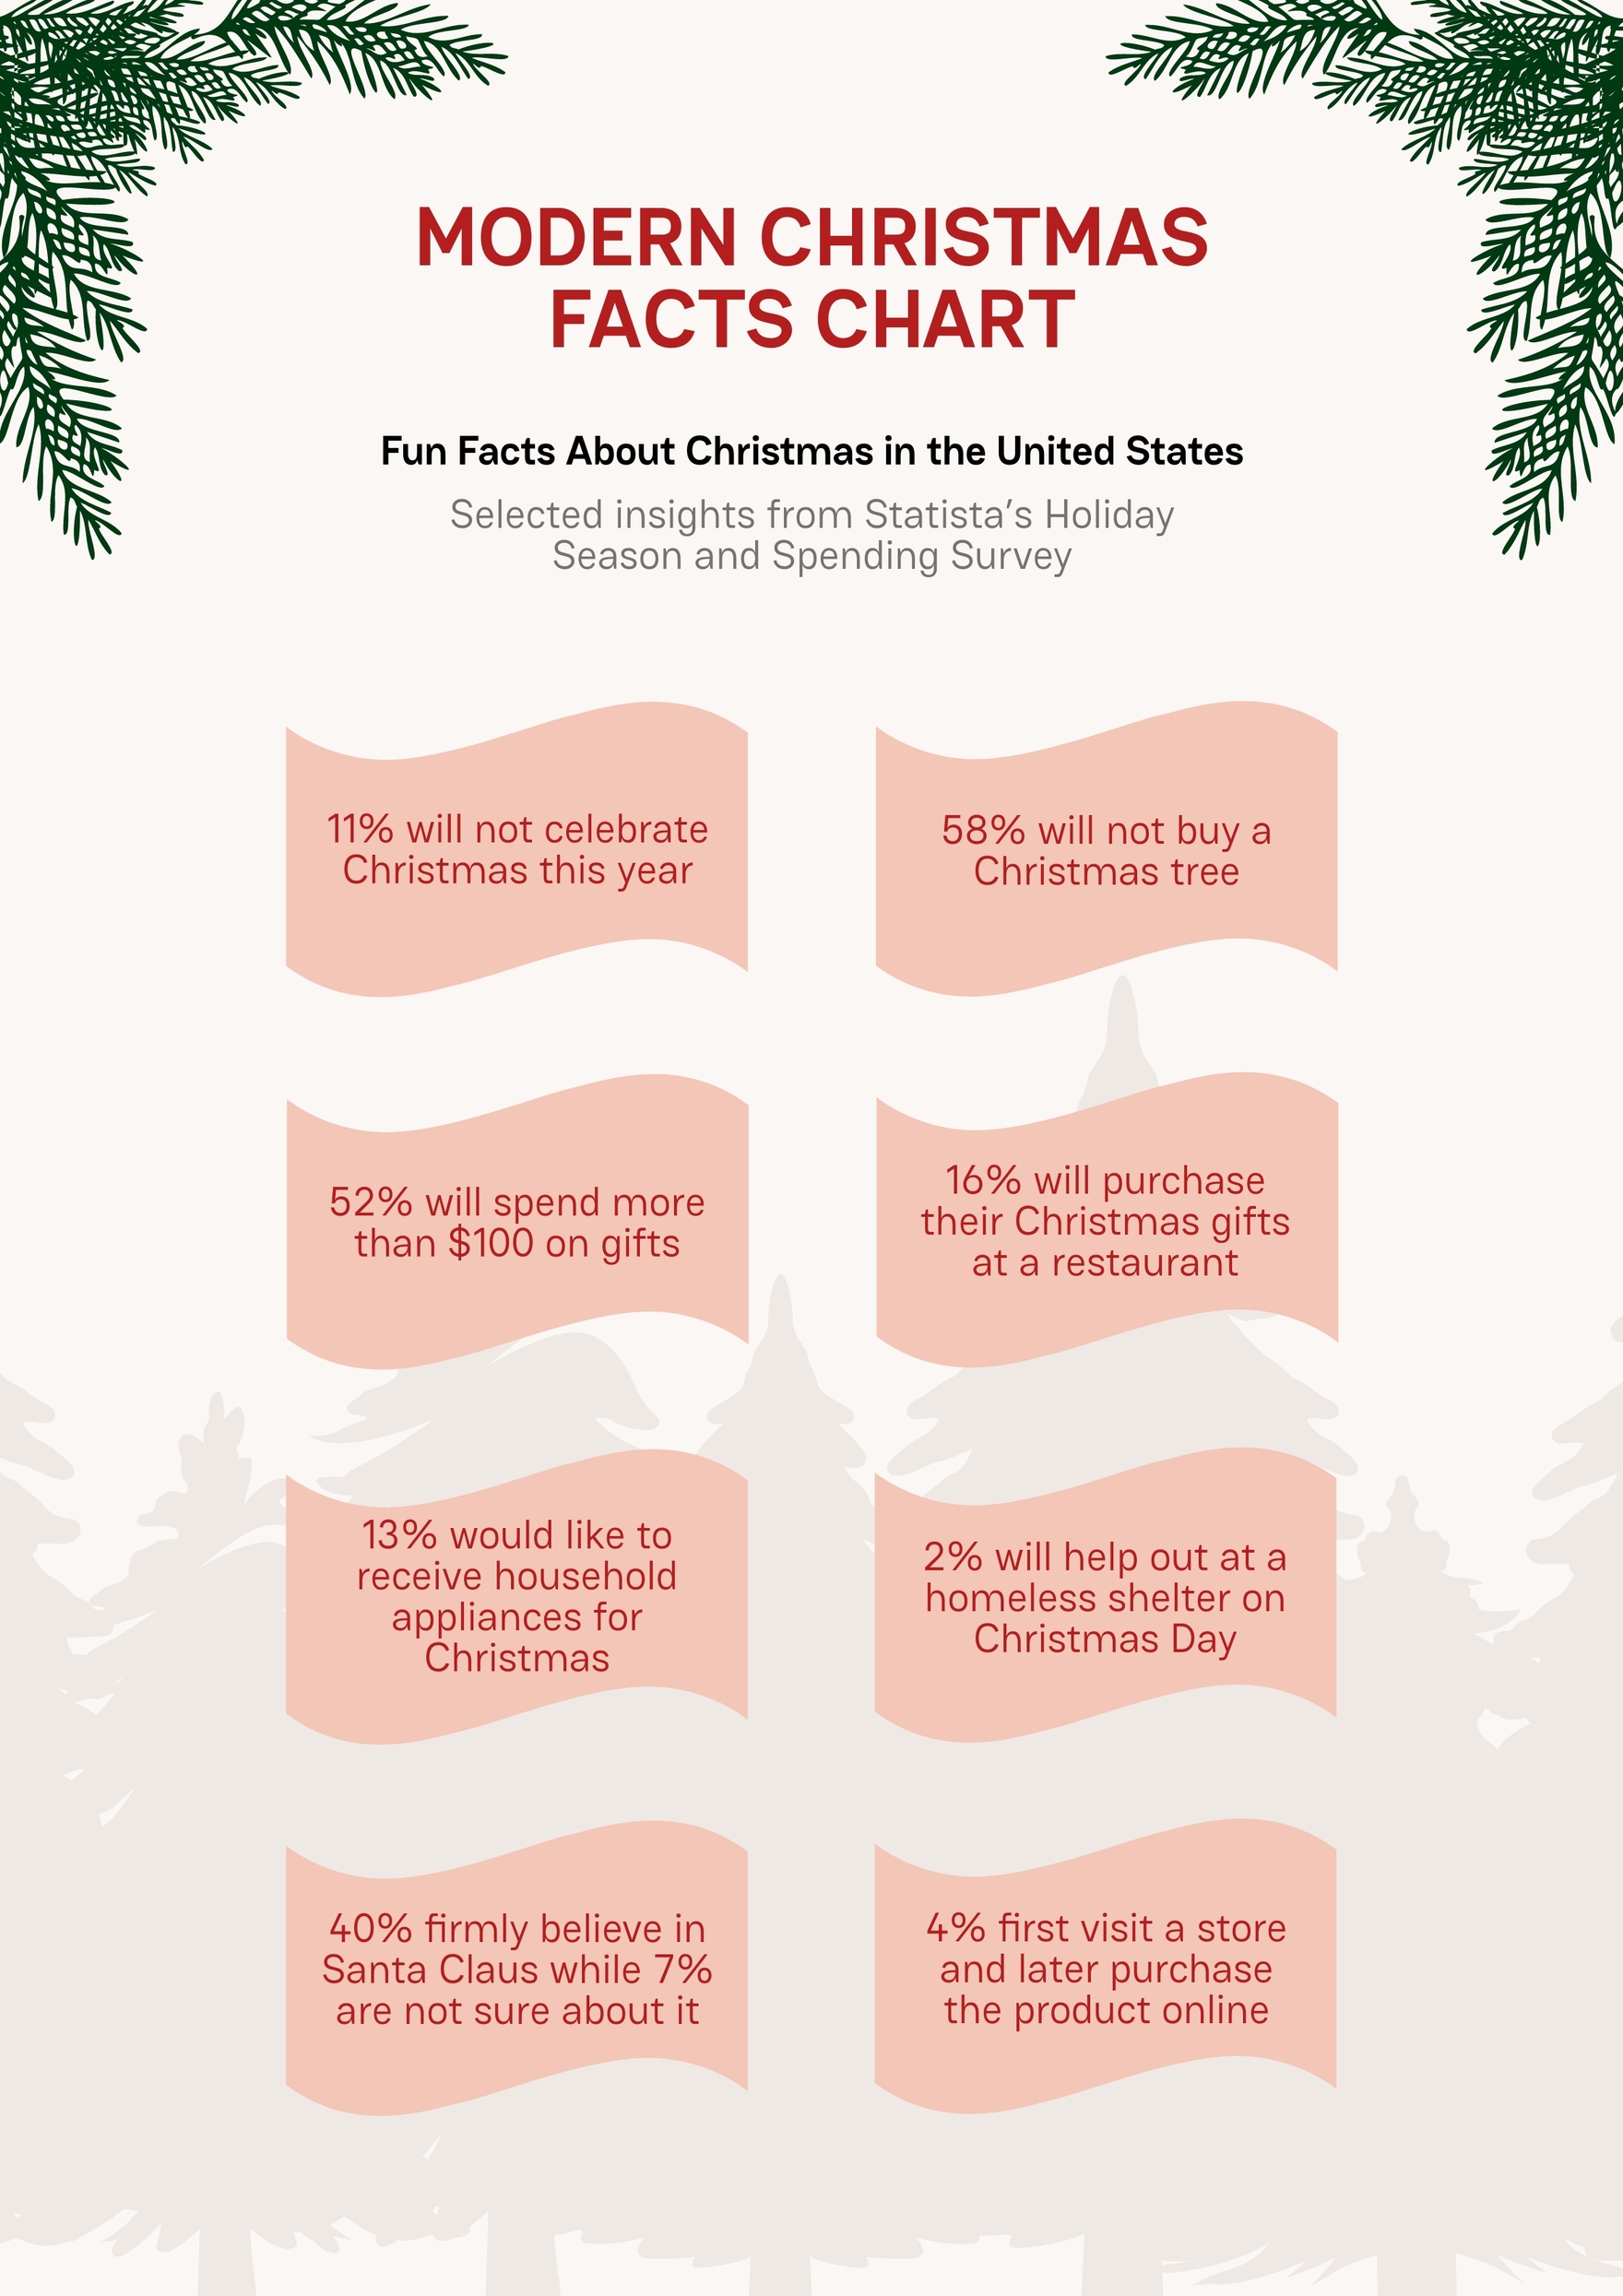 Free Modern Christmas Facts Chart in PDF, Illustrator